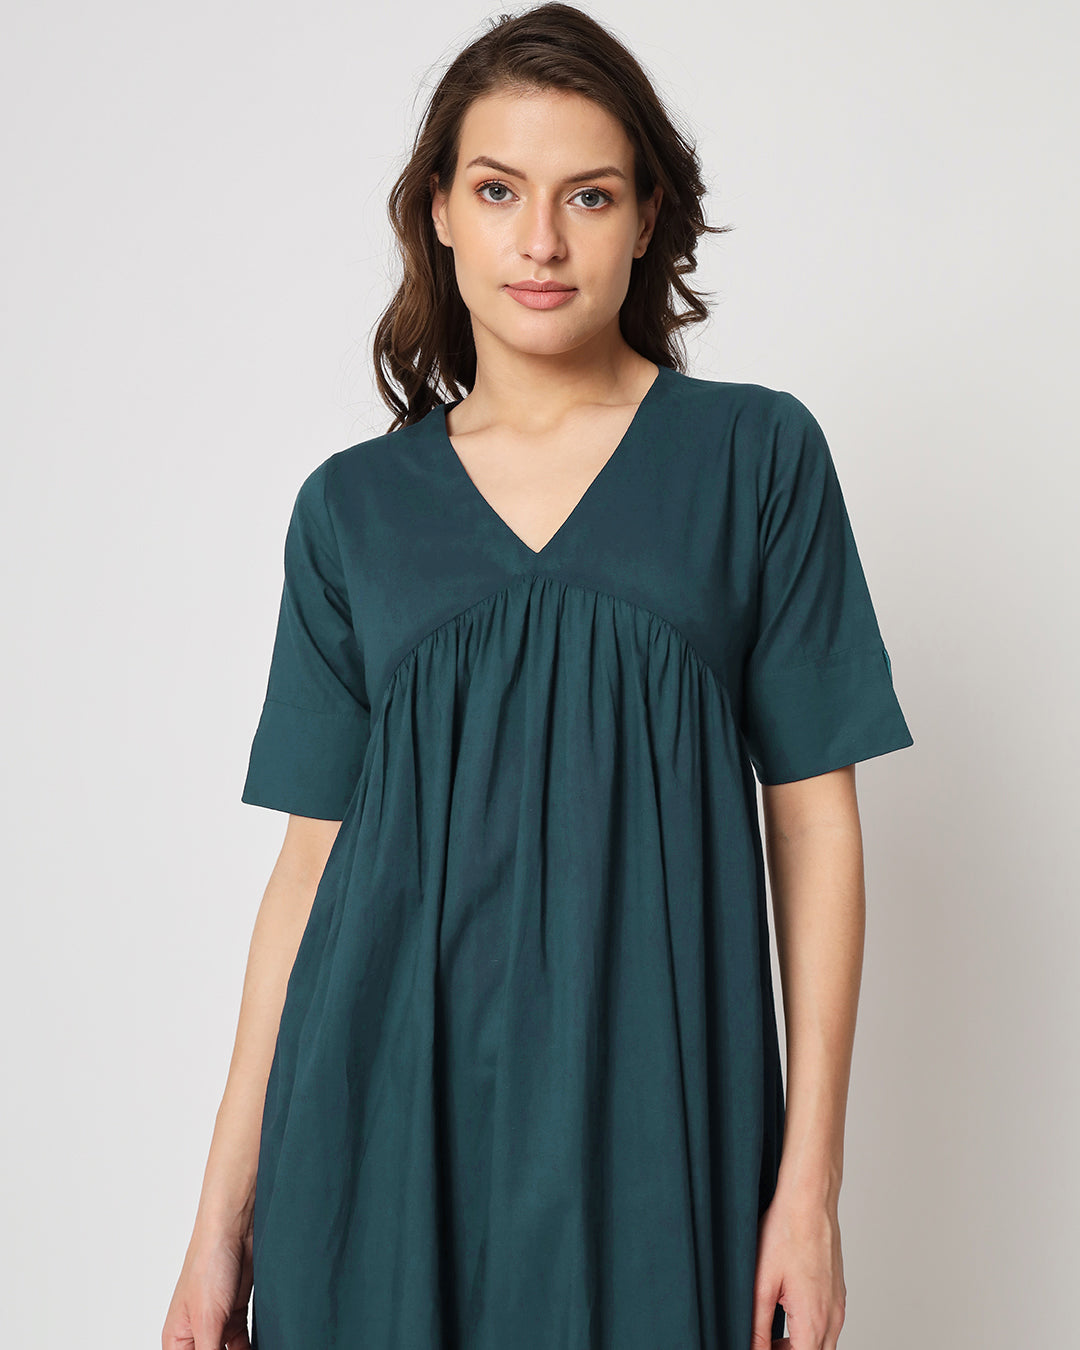 Deep Teal Gathered Solid Kurta (Without Bottoms)